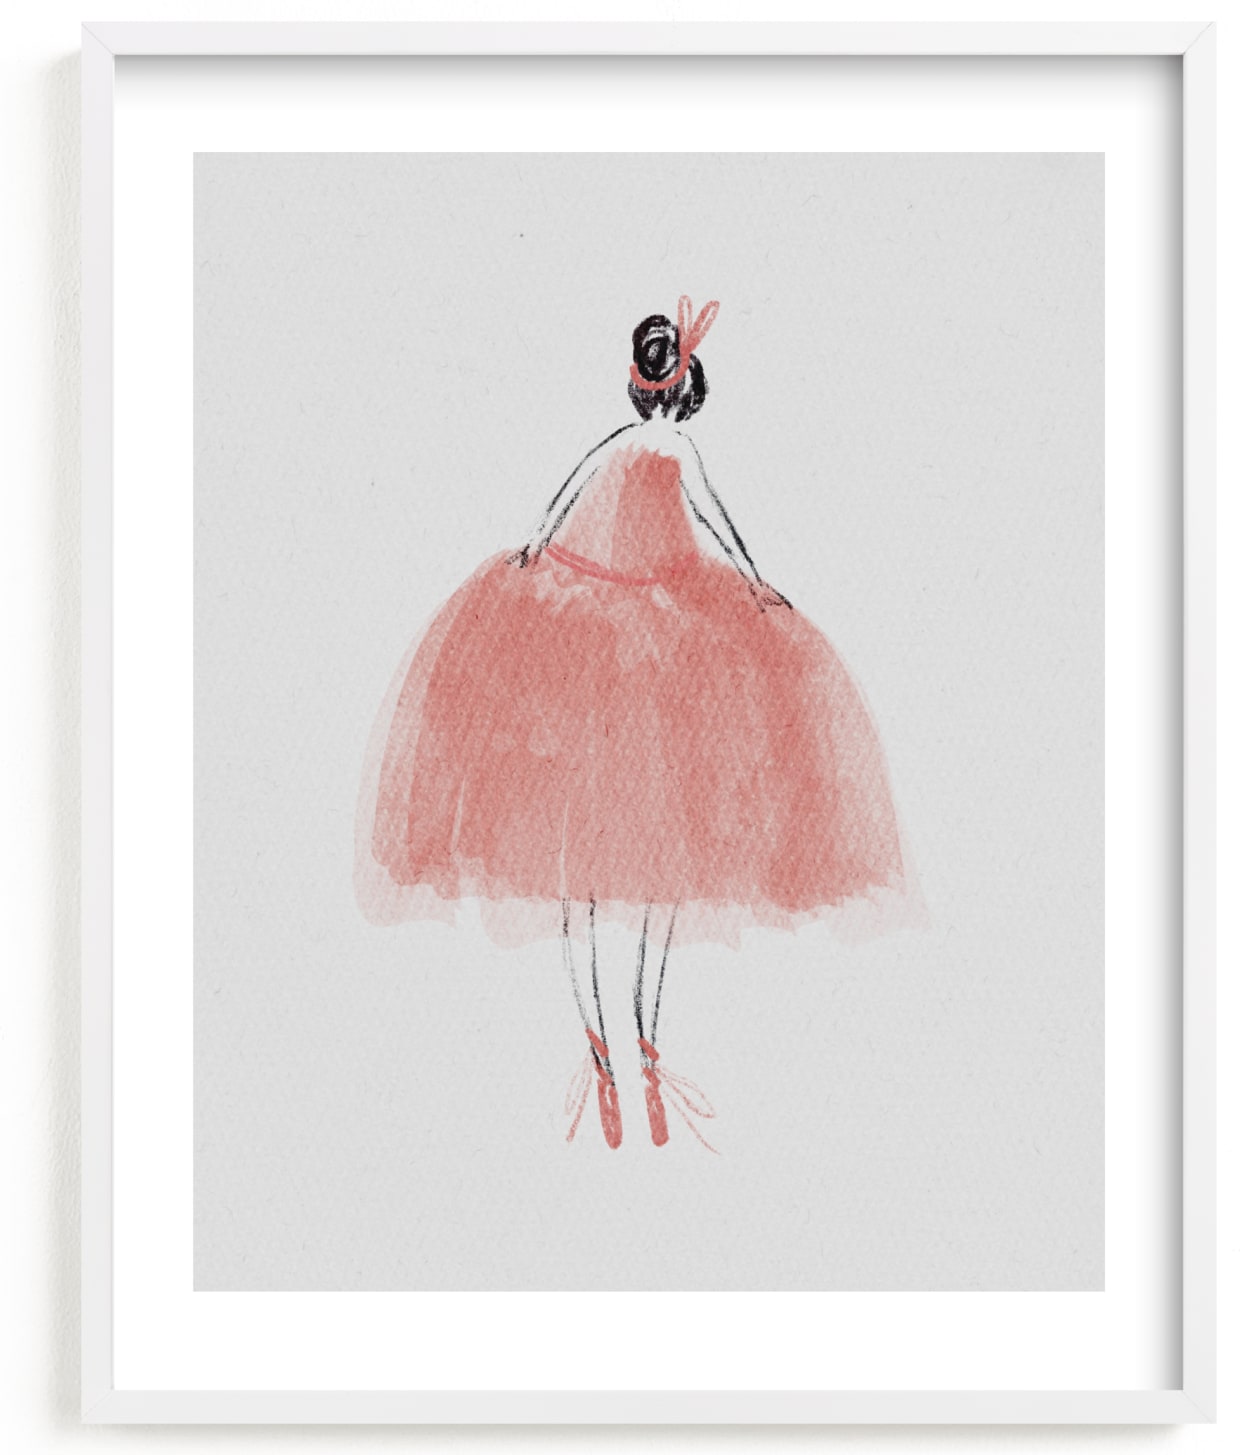 This is a colorful kids wall art by Grae called Painted Ballerina.